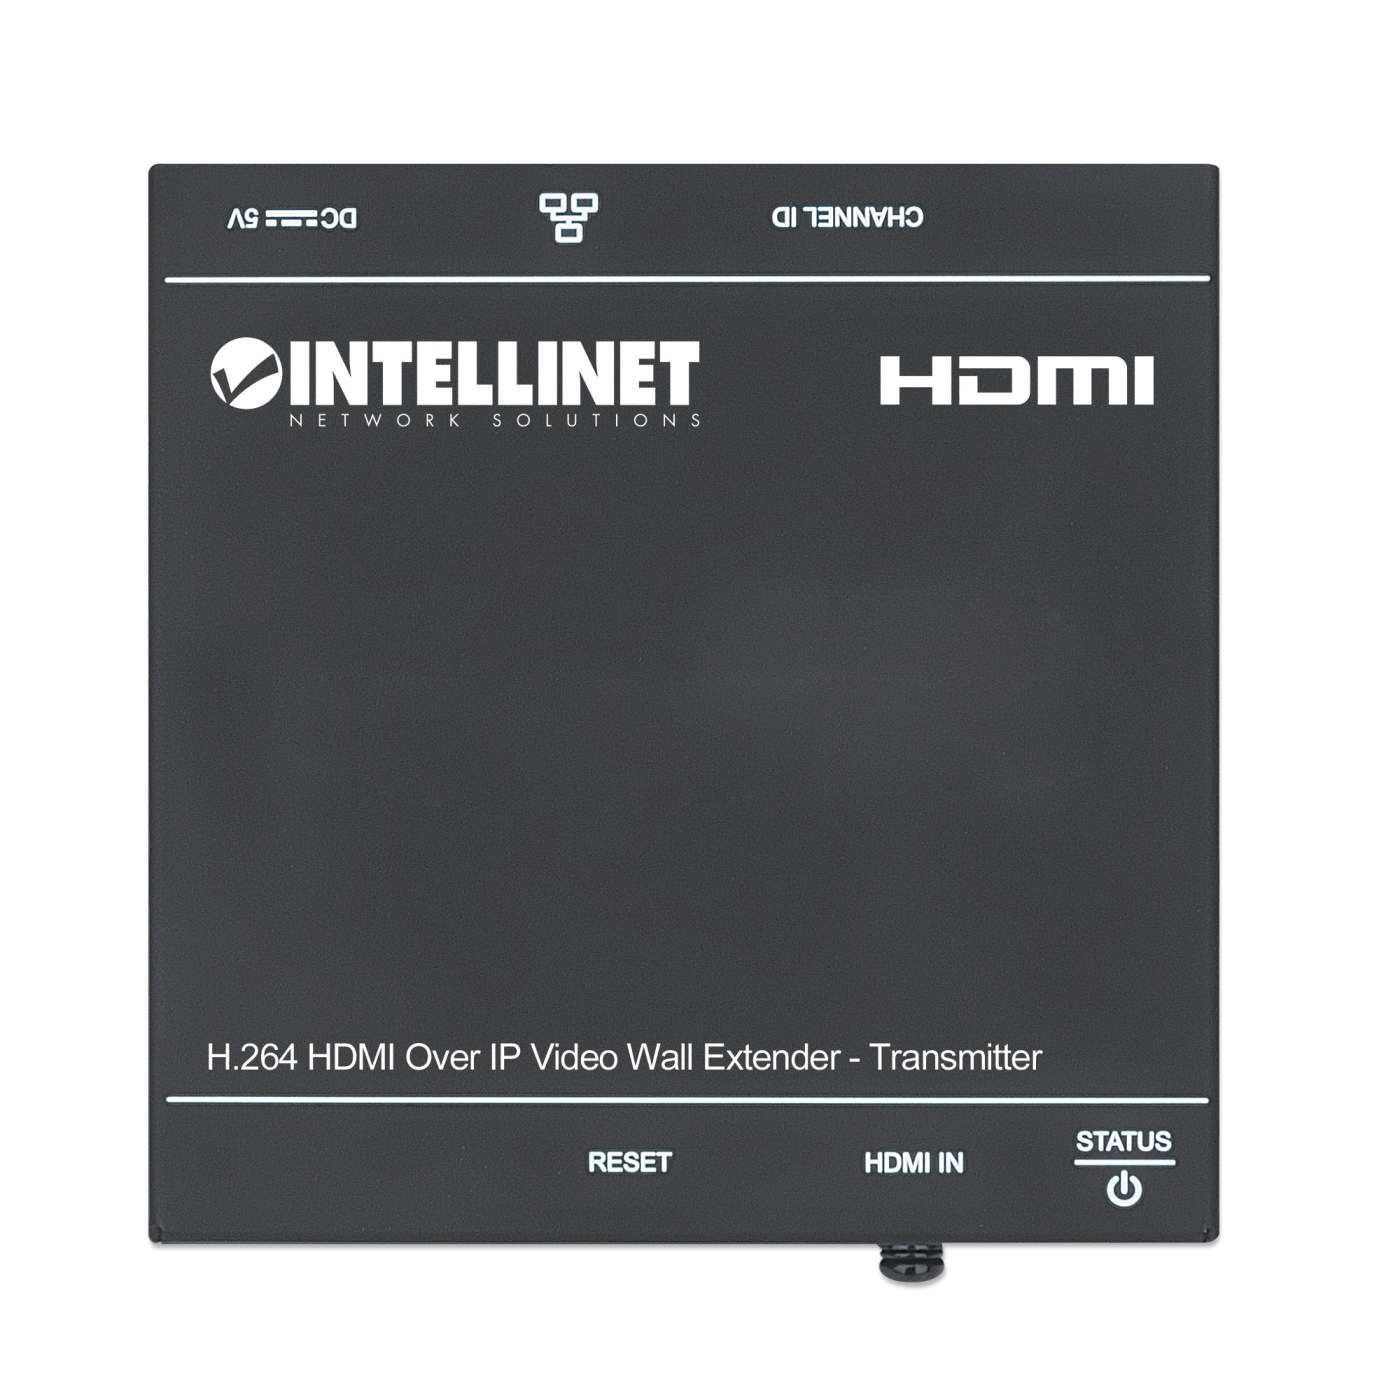 H.264 HDMI Over IP Video Wall Extender - Transmitter Image 7